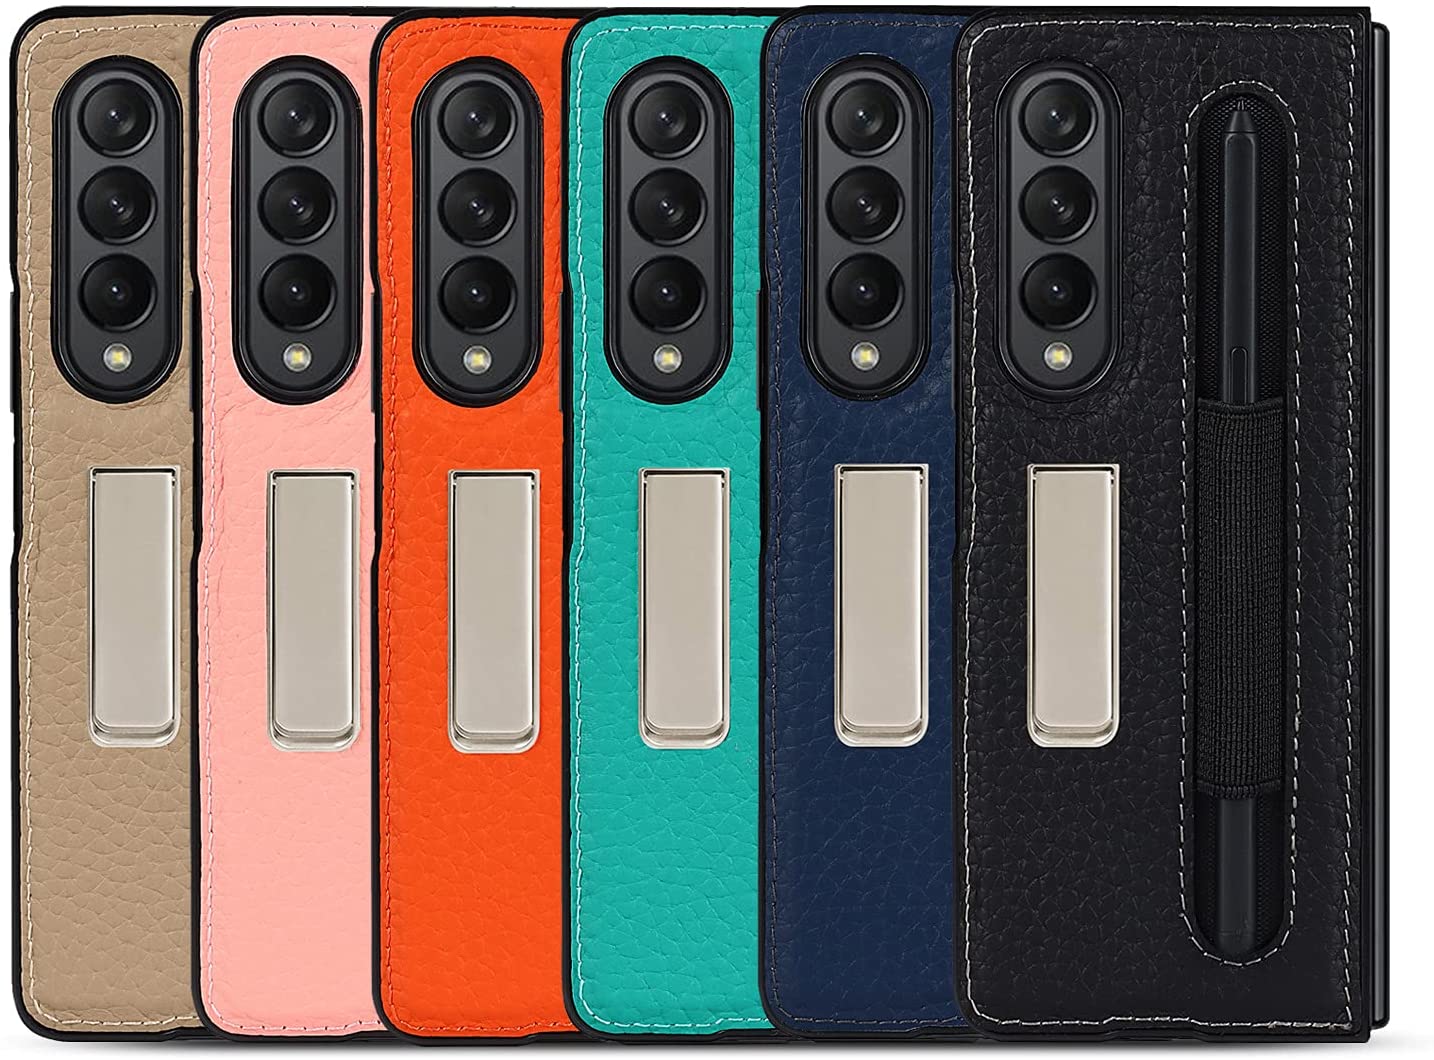 Dootoo Z Fold 3 Pen Case With Kickstand All Colors